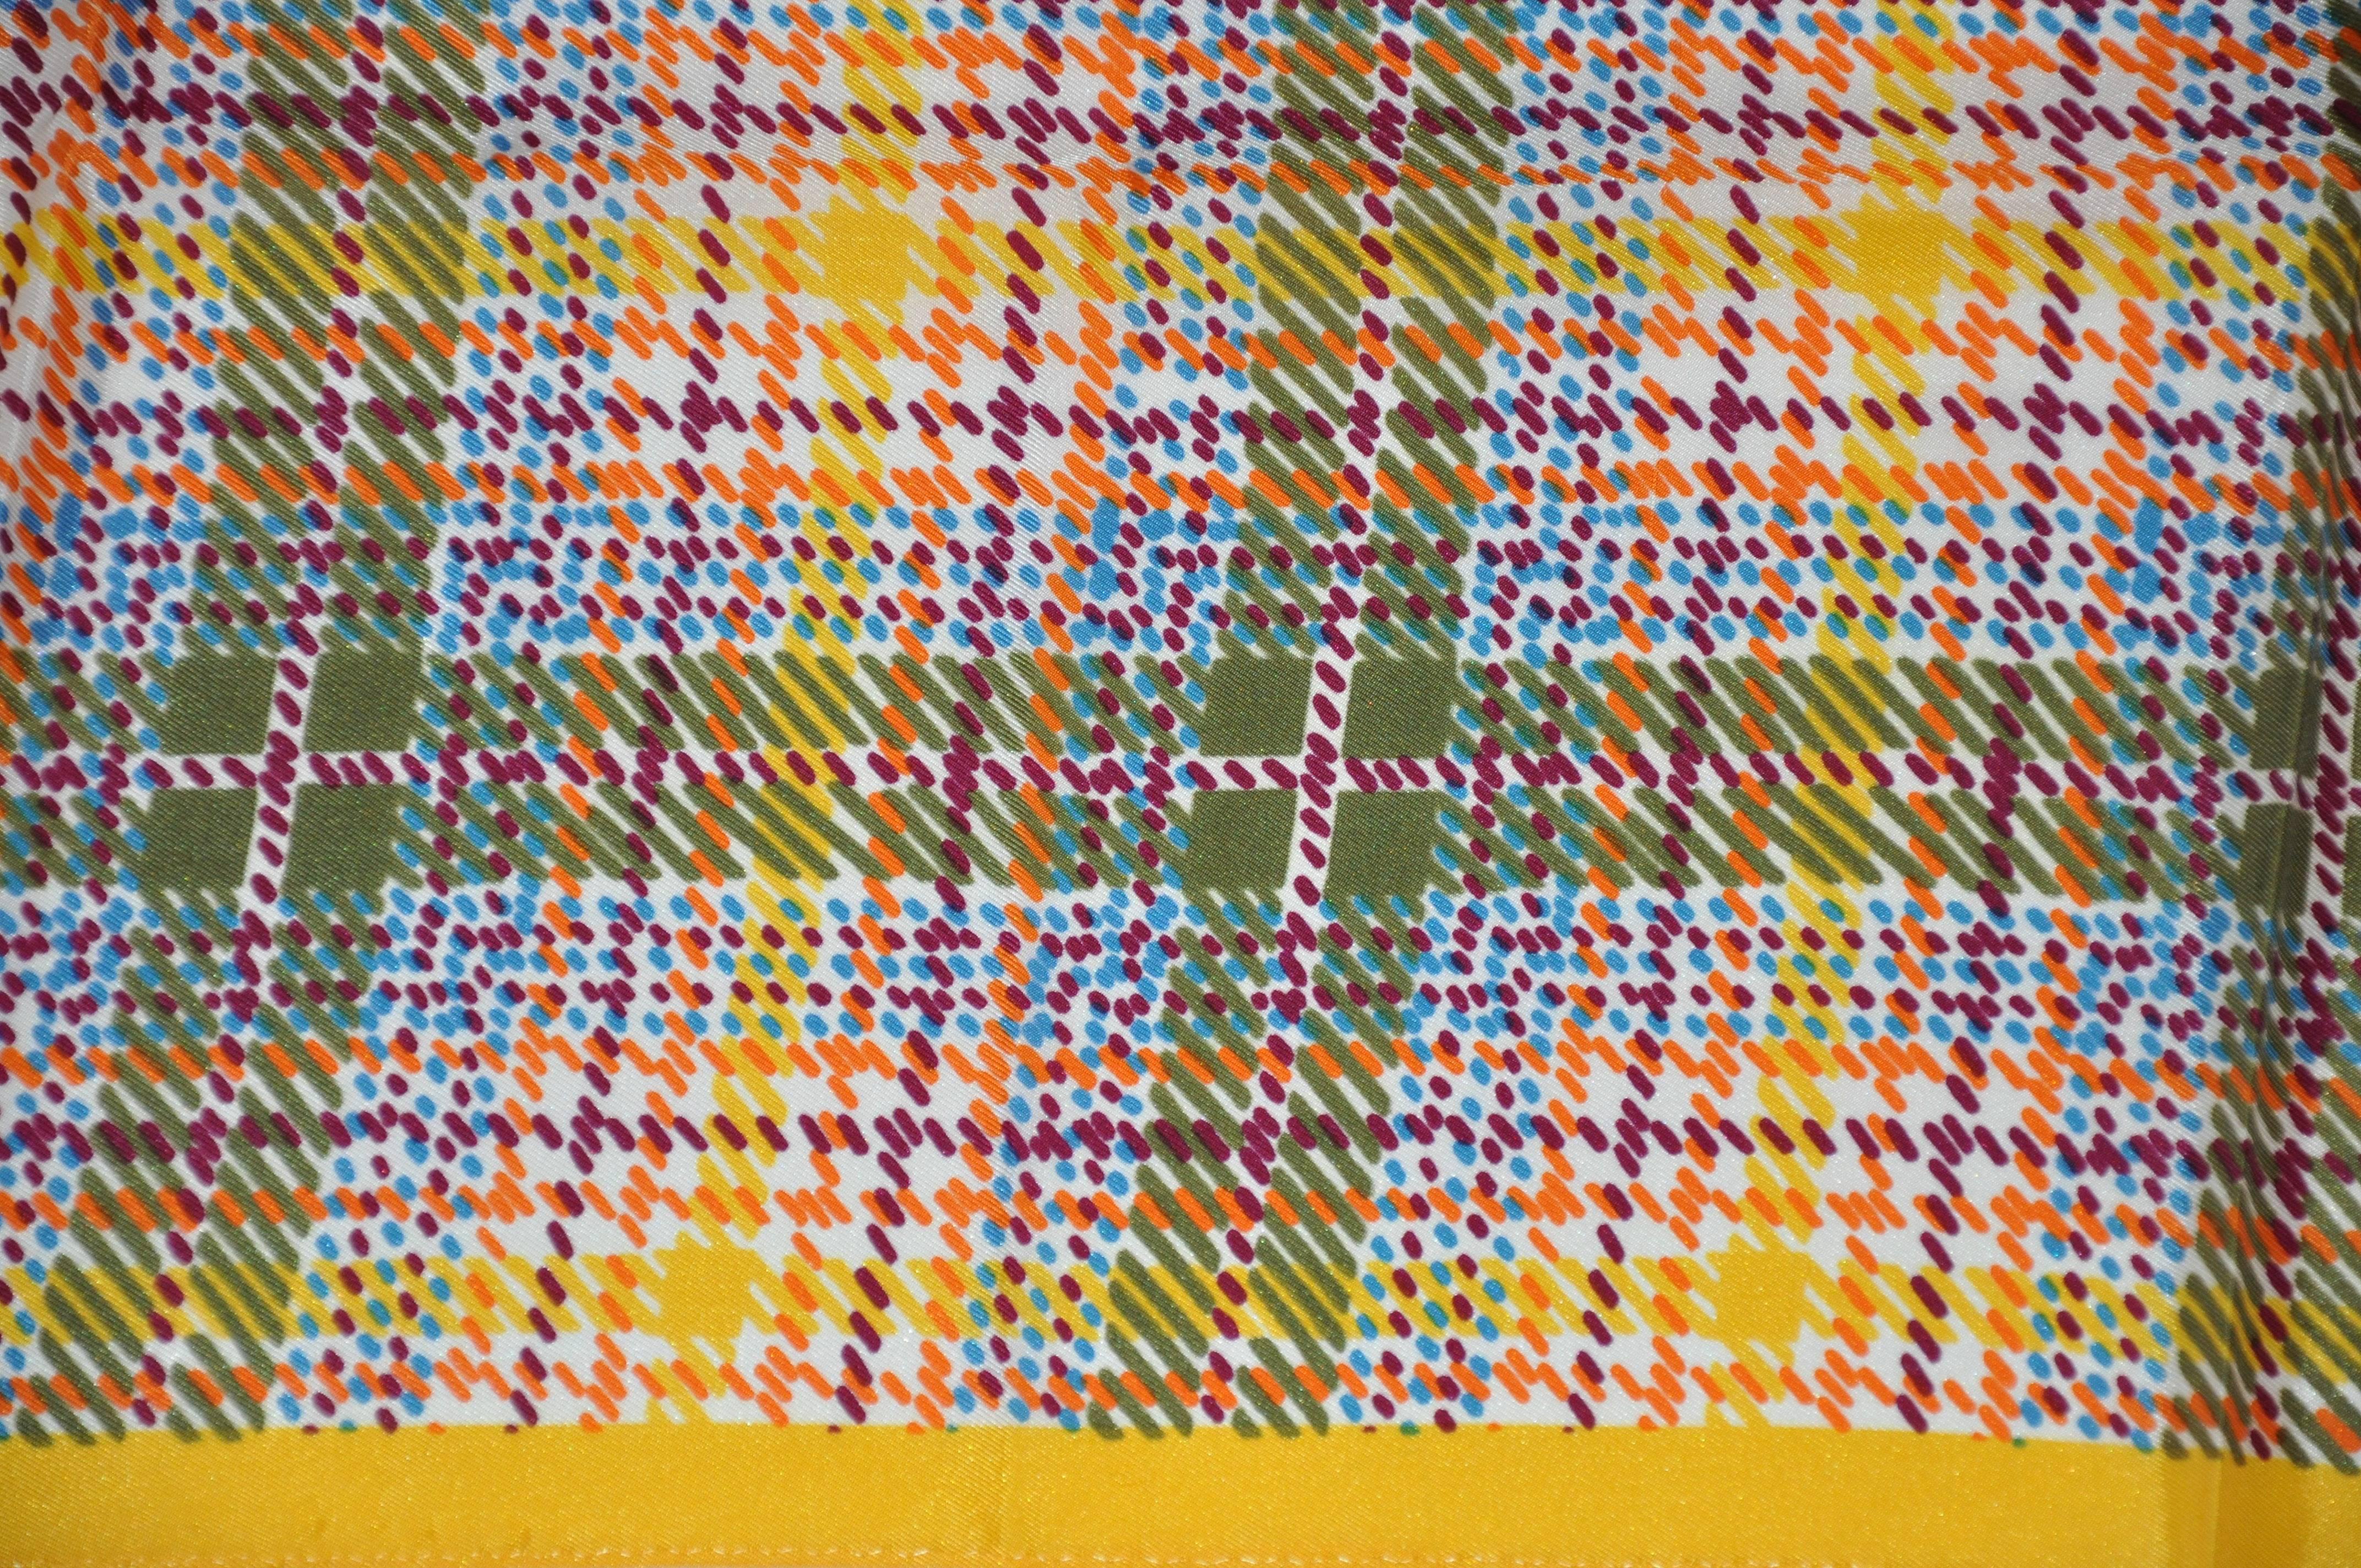 Bright multi-color plaid rectangle scarf measures 13" x 44", finished with rolled edges. Made of acetate and made in Japan.